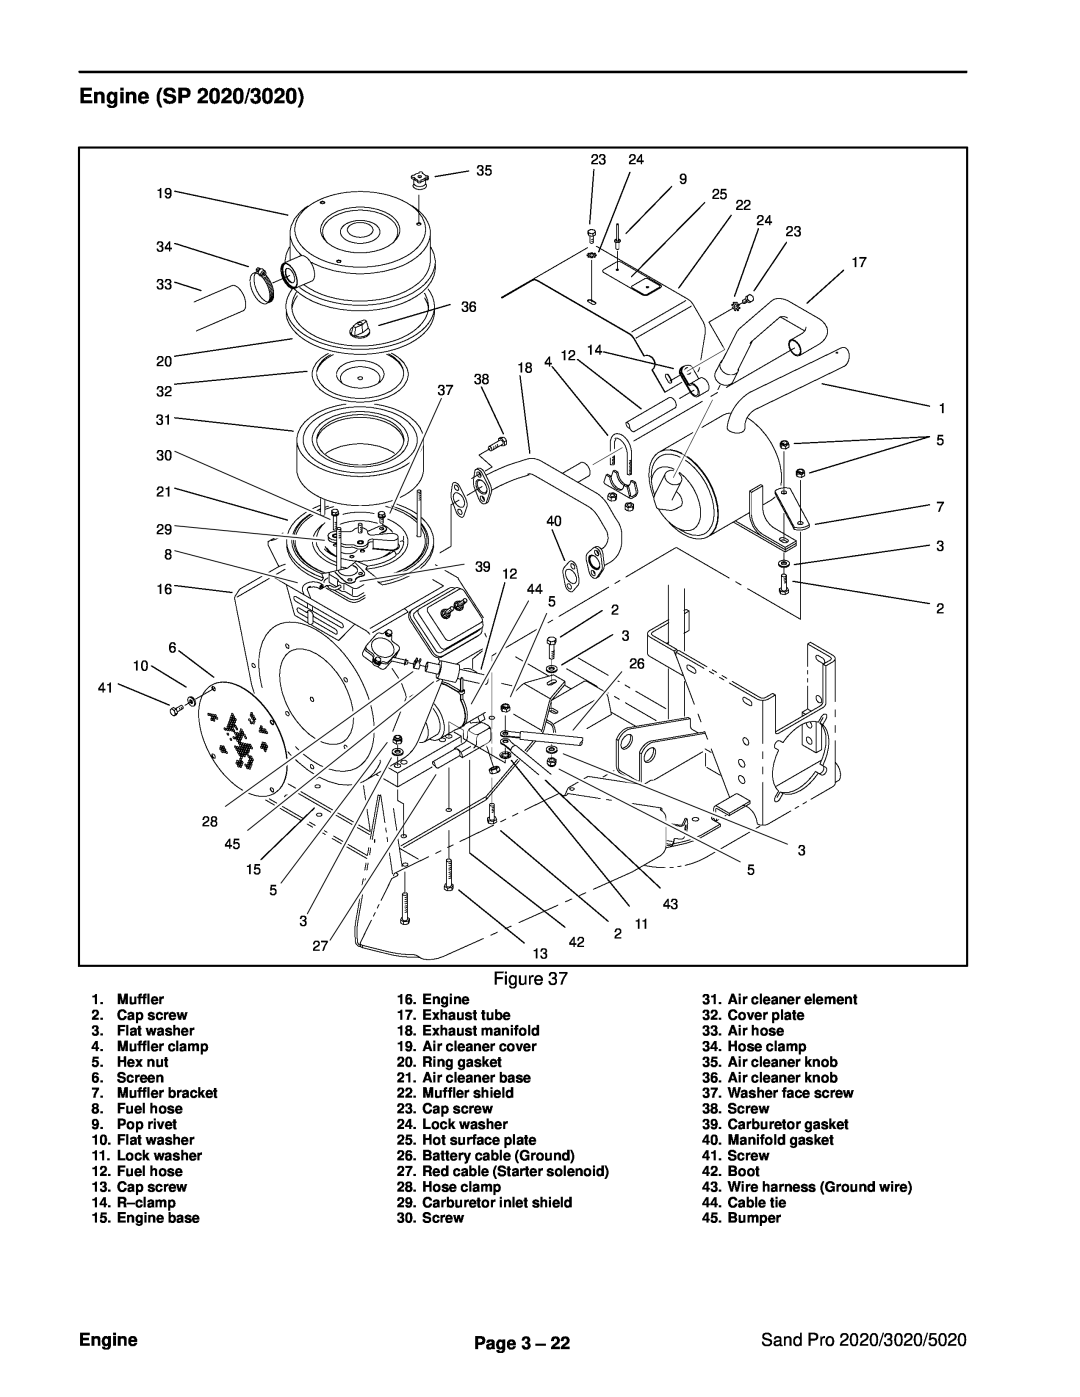 Toro service manual Engine SP 2020/3020, Page 3, Sand Pro 2020/3020/5020, Wire harness Ground wire 